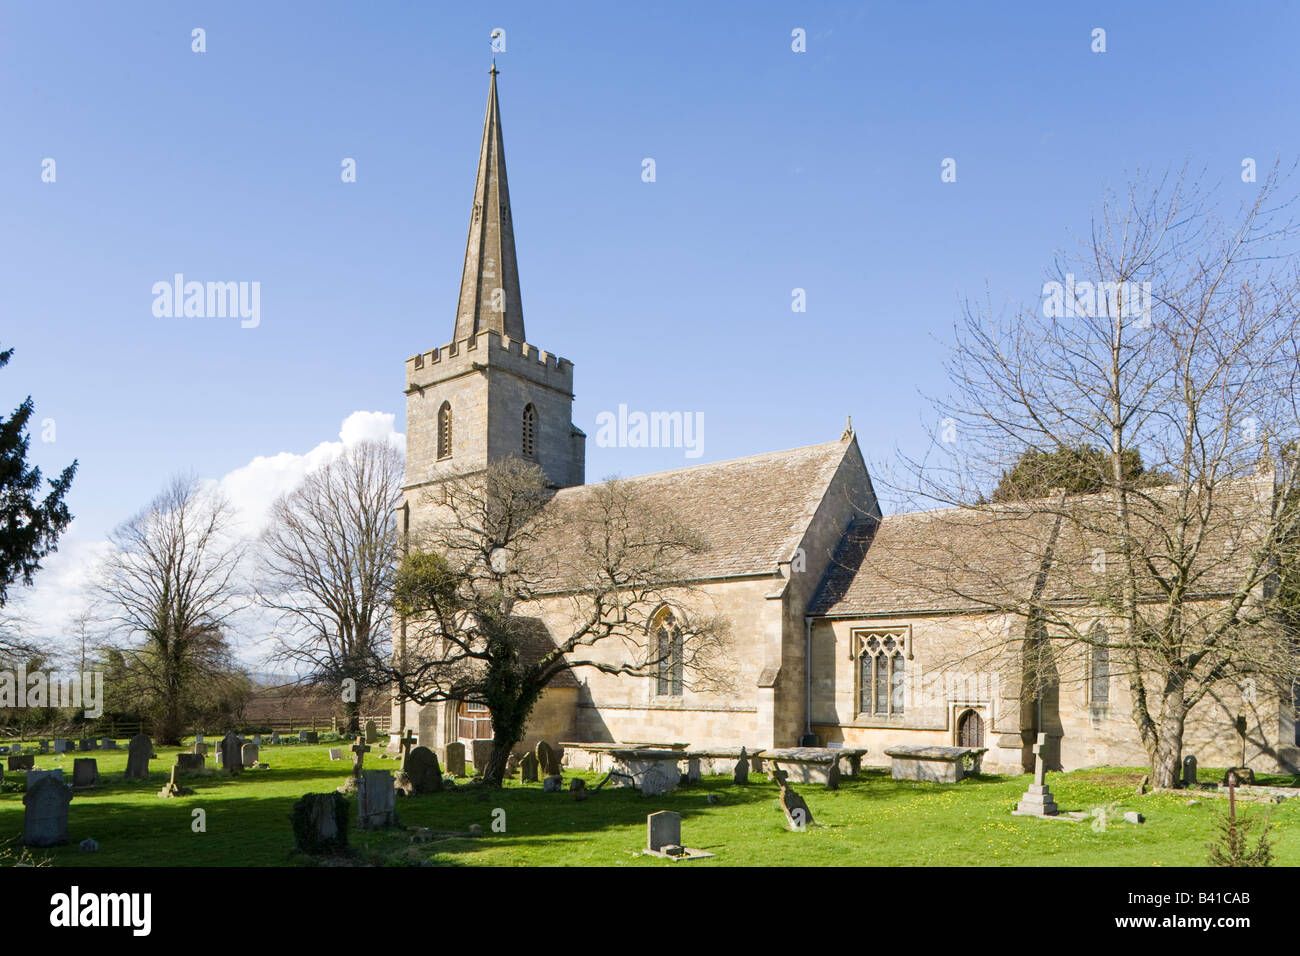 St Peters church in the village of Haresfield, Gloucestershire Stock Photo